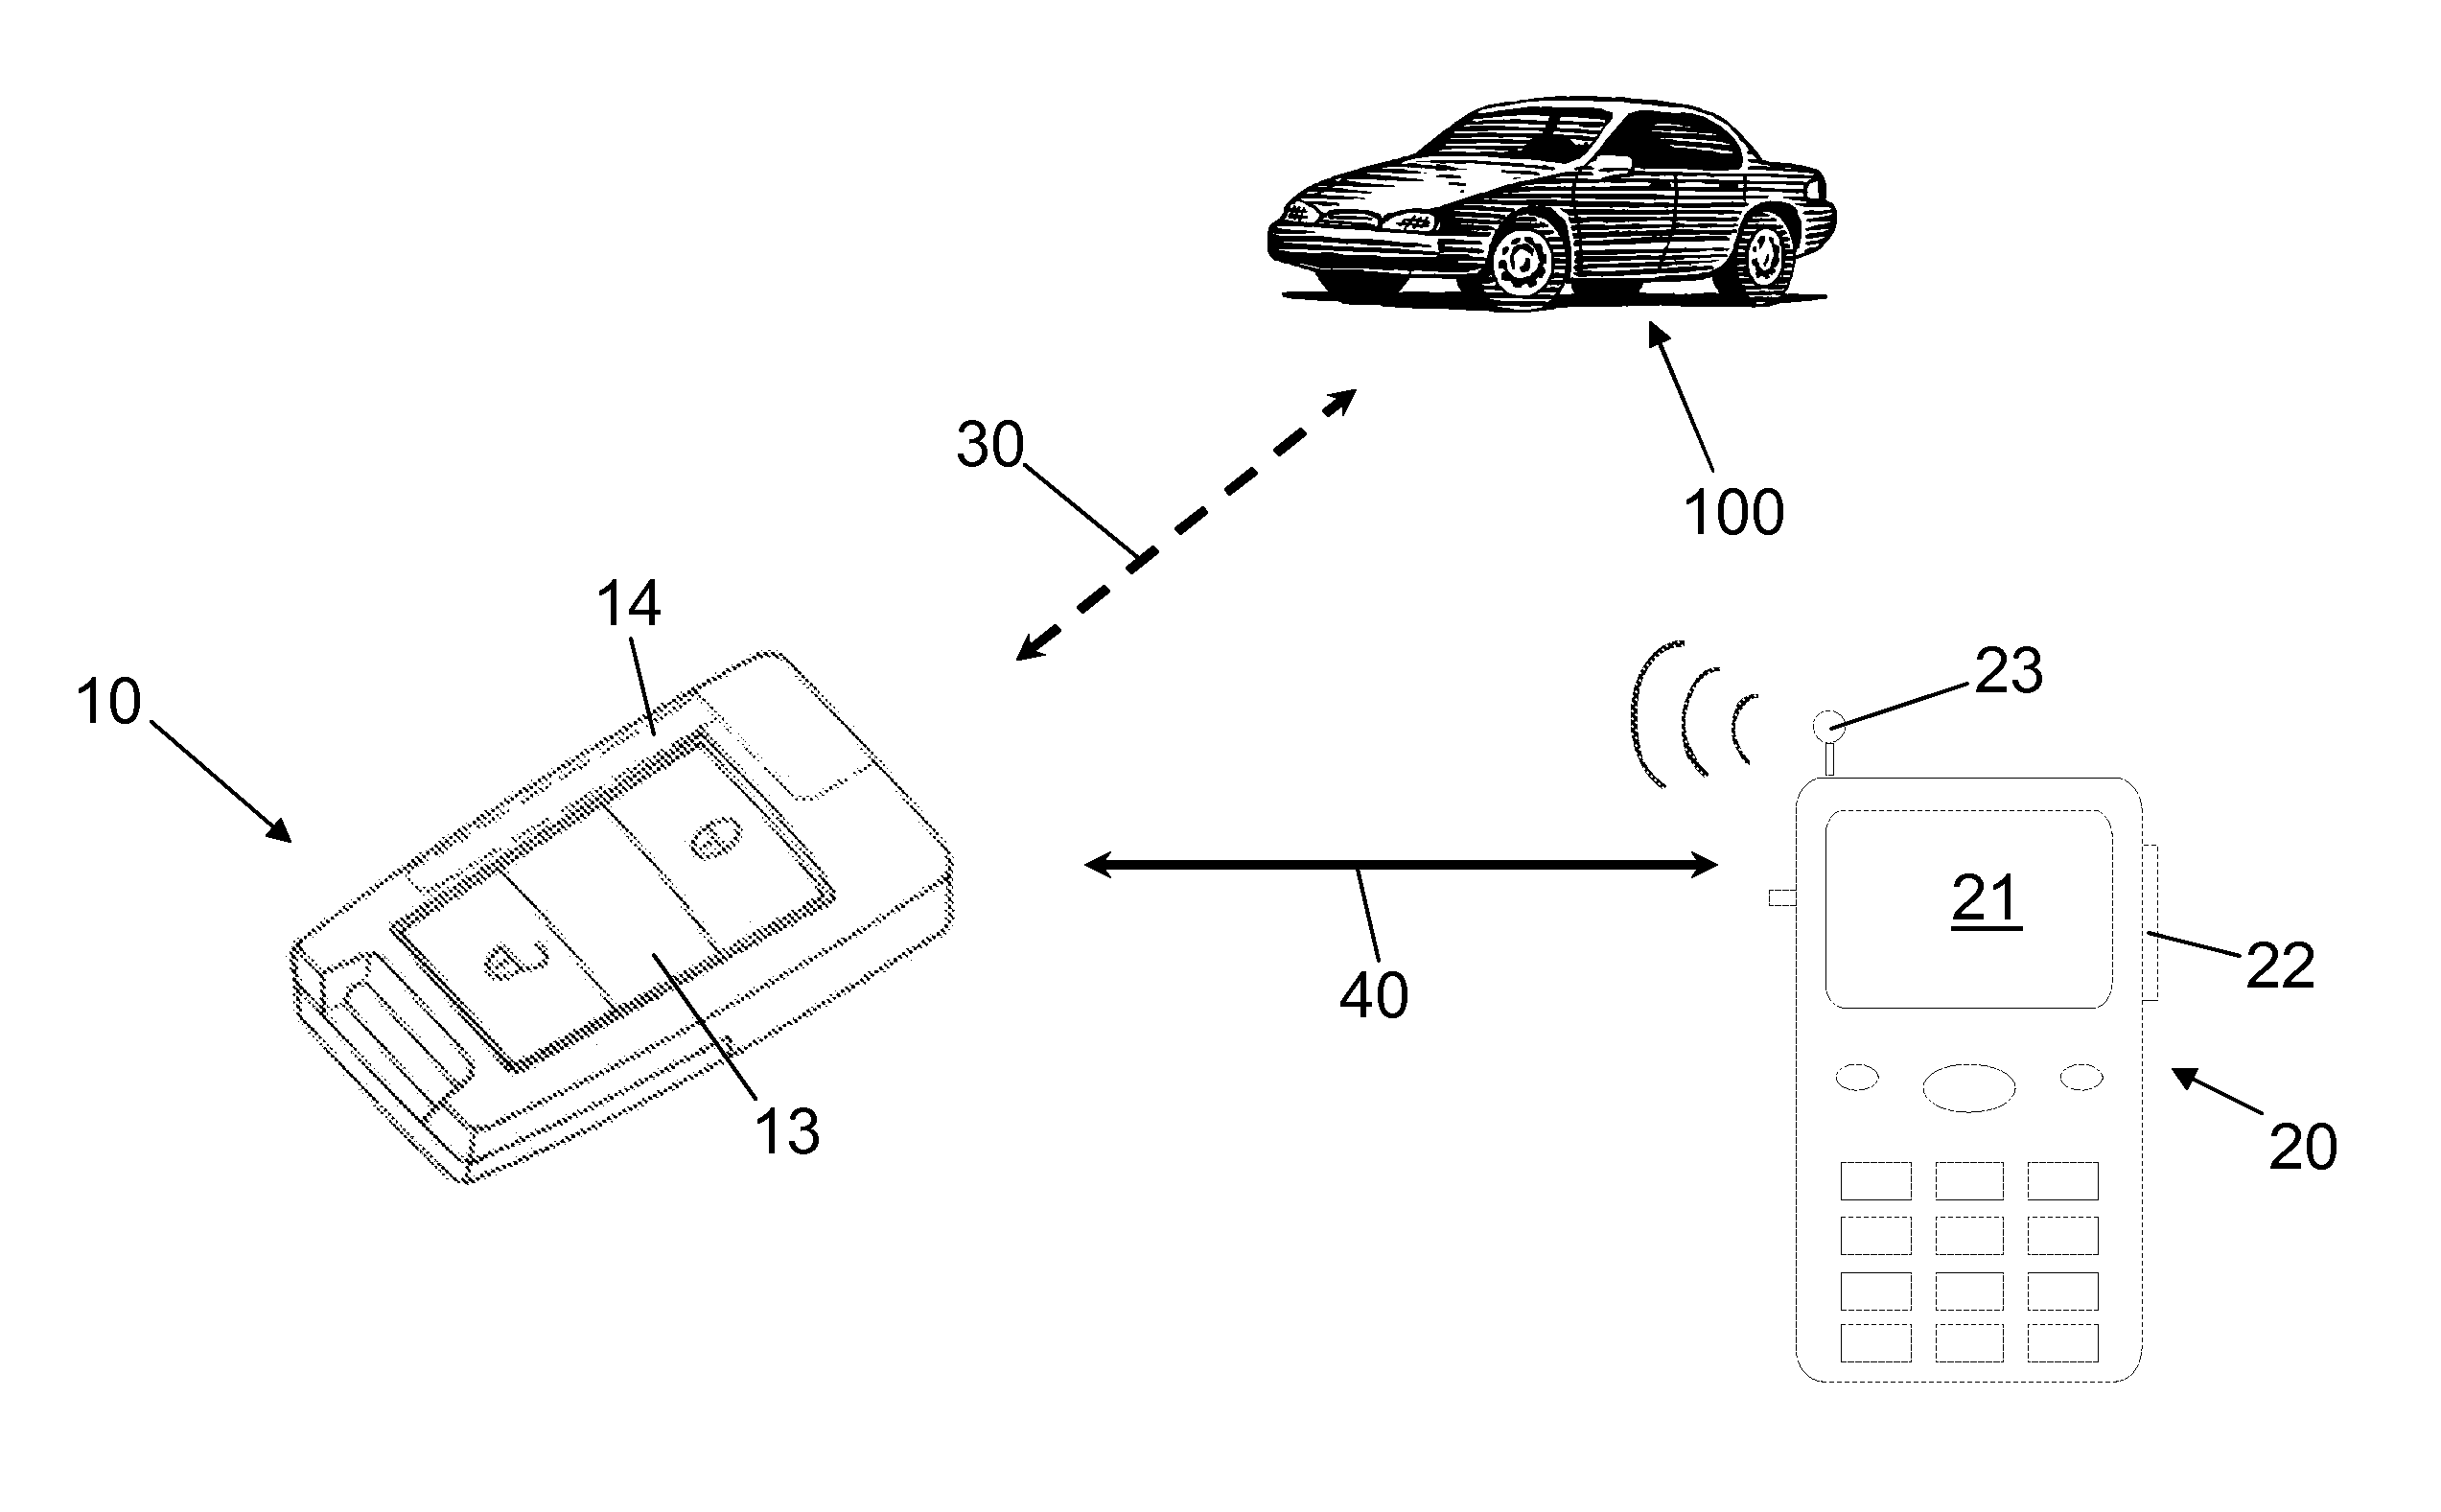 Method for displaying information from an id transmitter